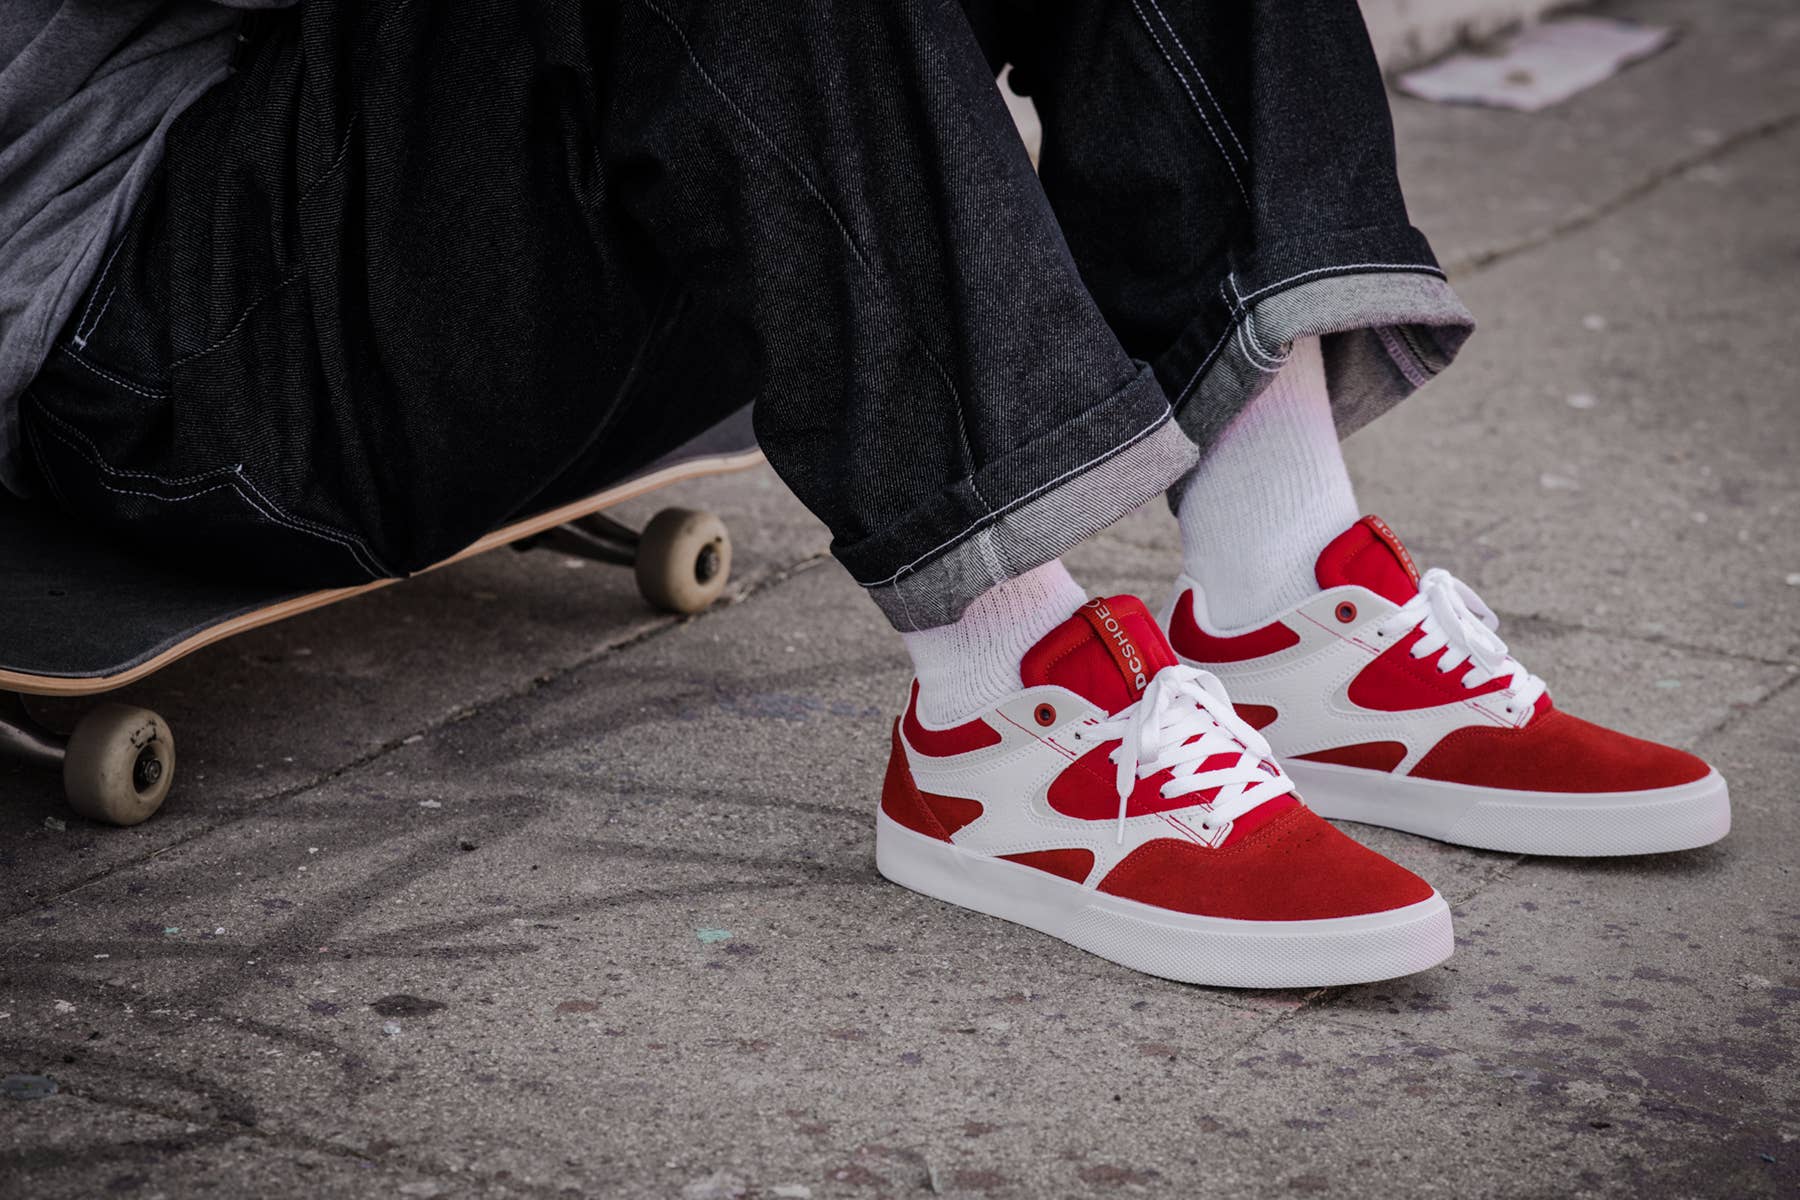 DC Shoes' Kalis Vulc Melds '90s Style With Modern Performance | Complex